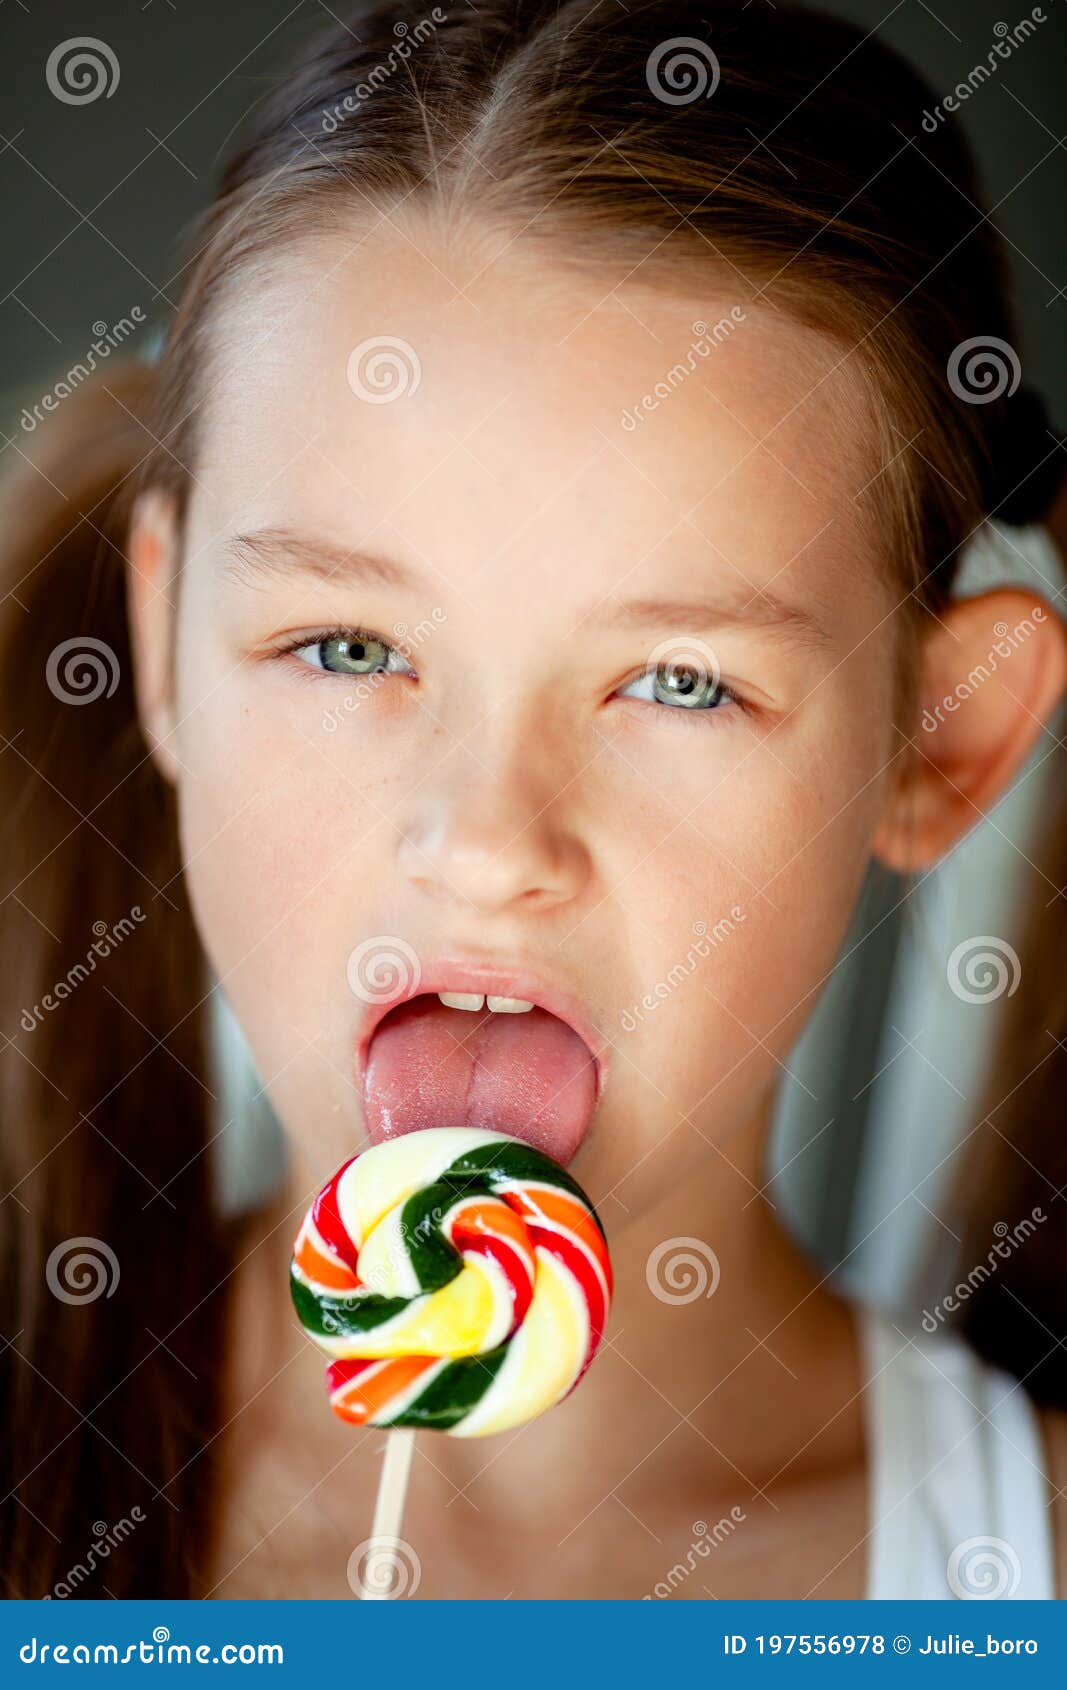 aaron guess recommends licking a lollipop pic